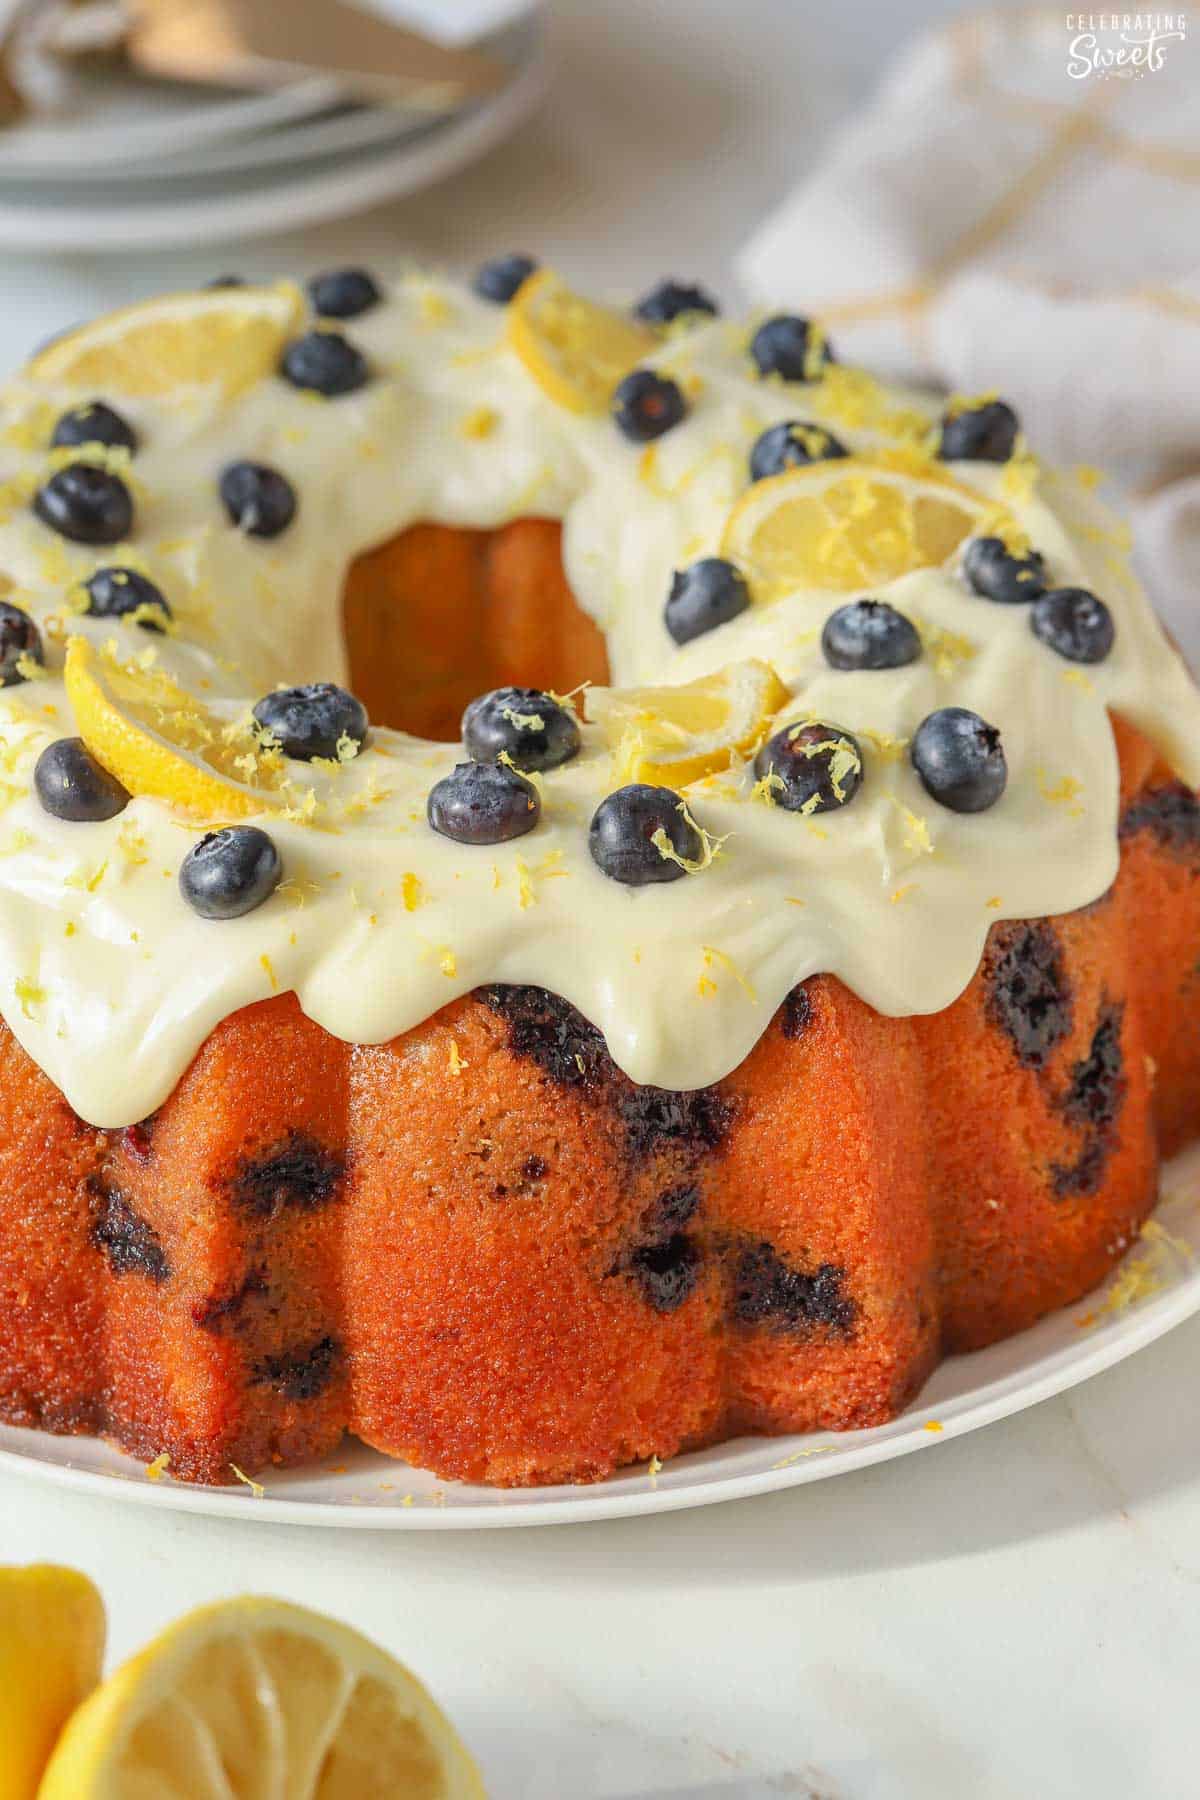 Lemon blueberry bundt cake on a white plate garnished with frosting, blueberries, and lemon slices.